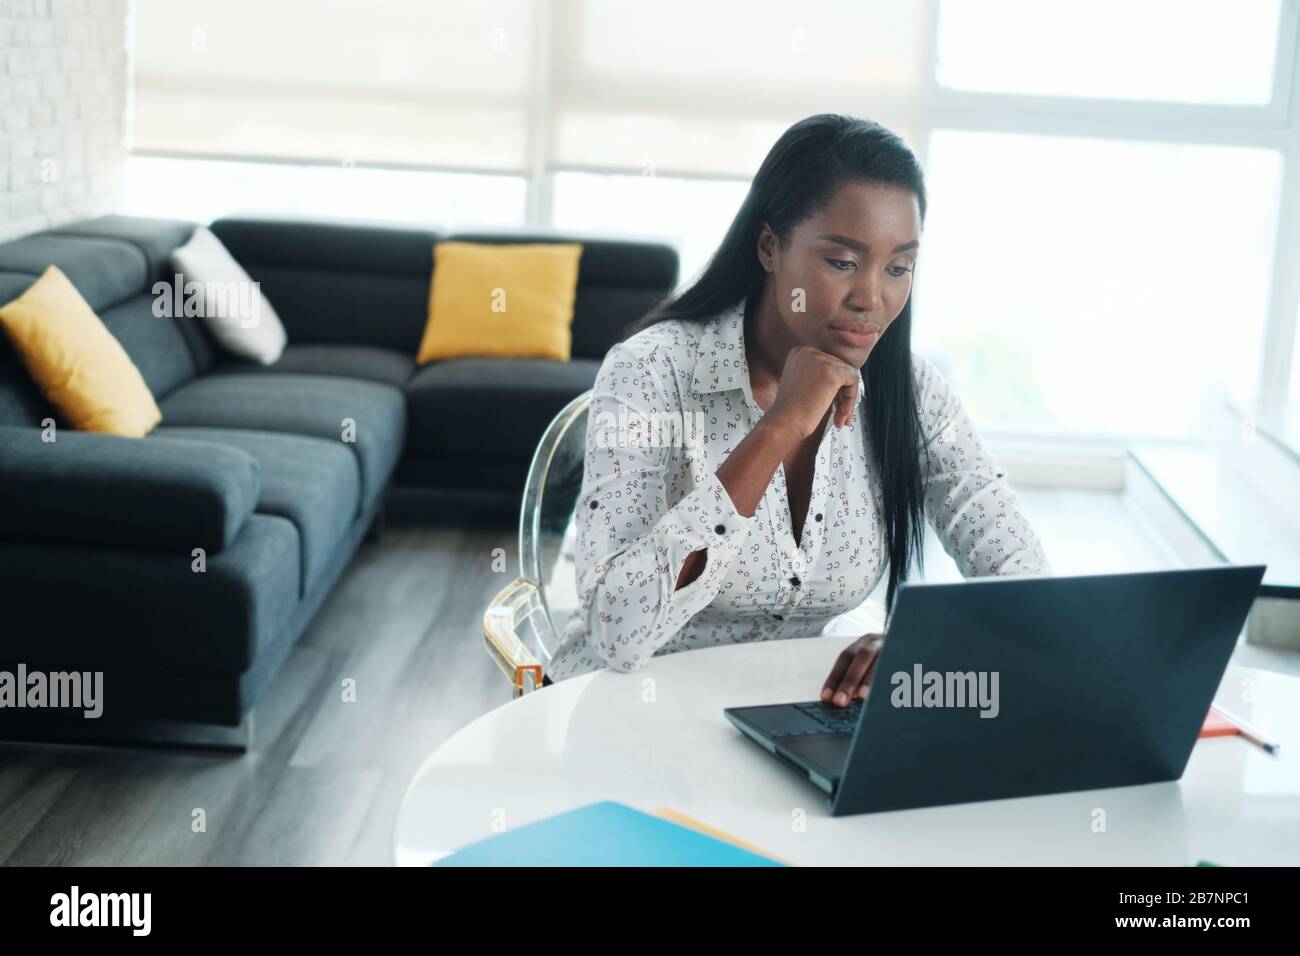 Black Woman Working From Home With Laptop Computer Stock Photo